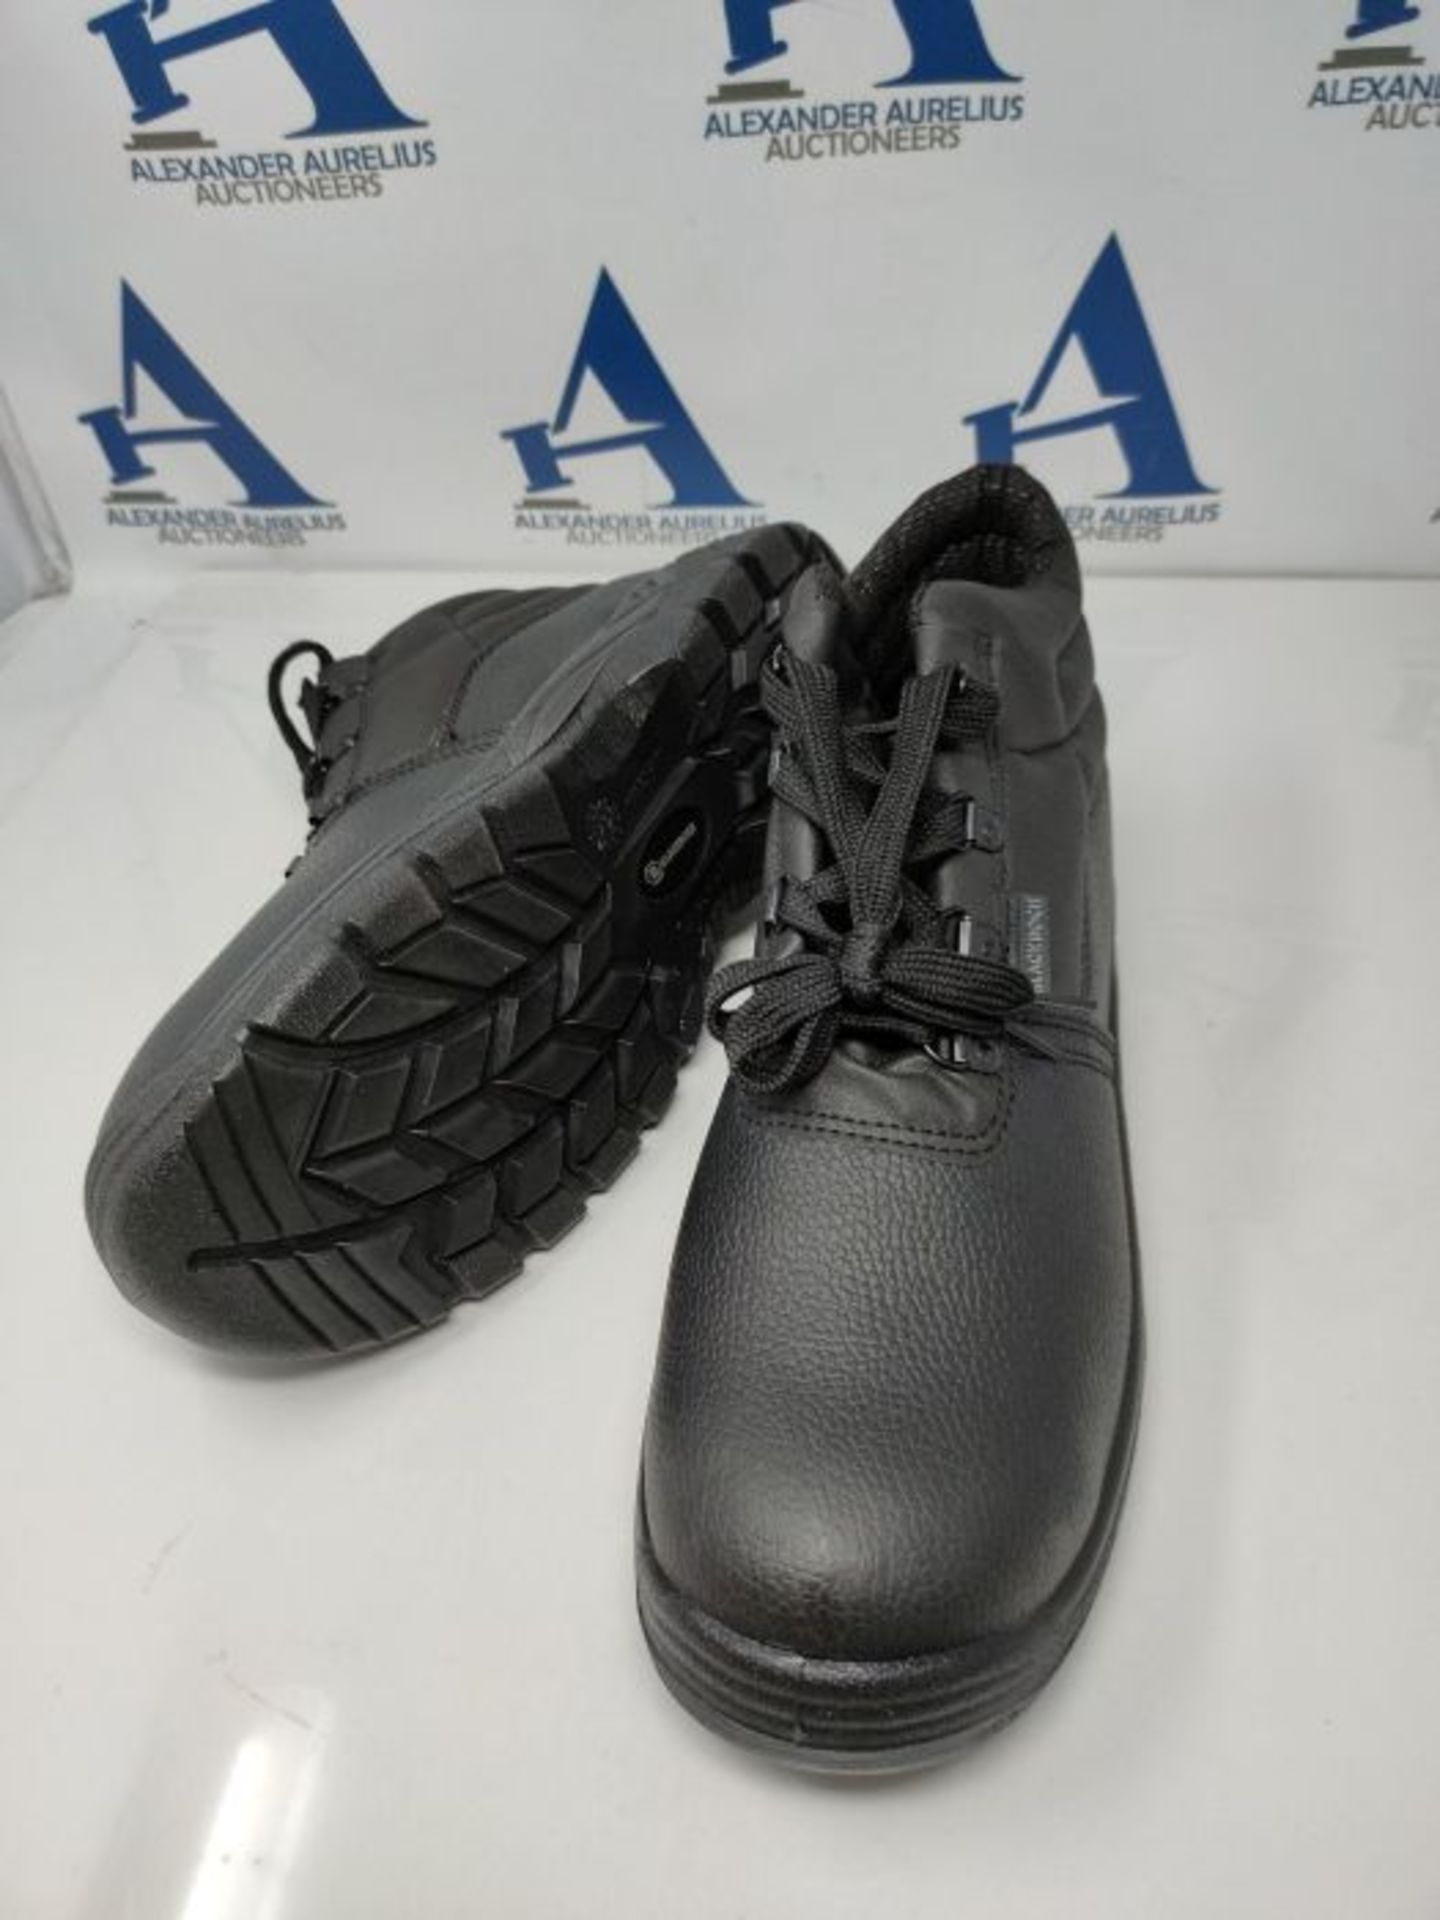 Blackrock SB-P SRC Safety Chukka Boots with Anti Static Protection, Black Leather Safe - Image 3 of 6